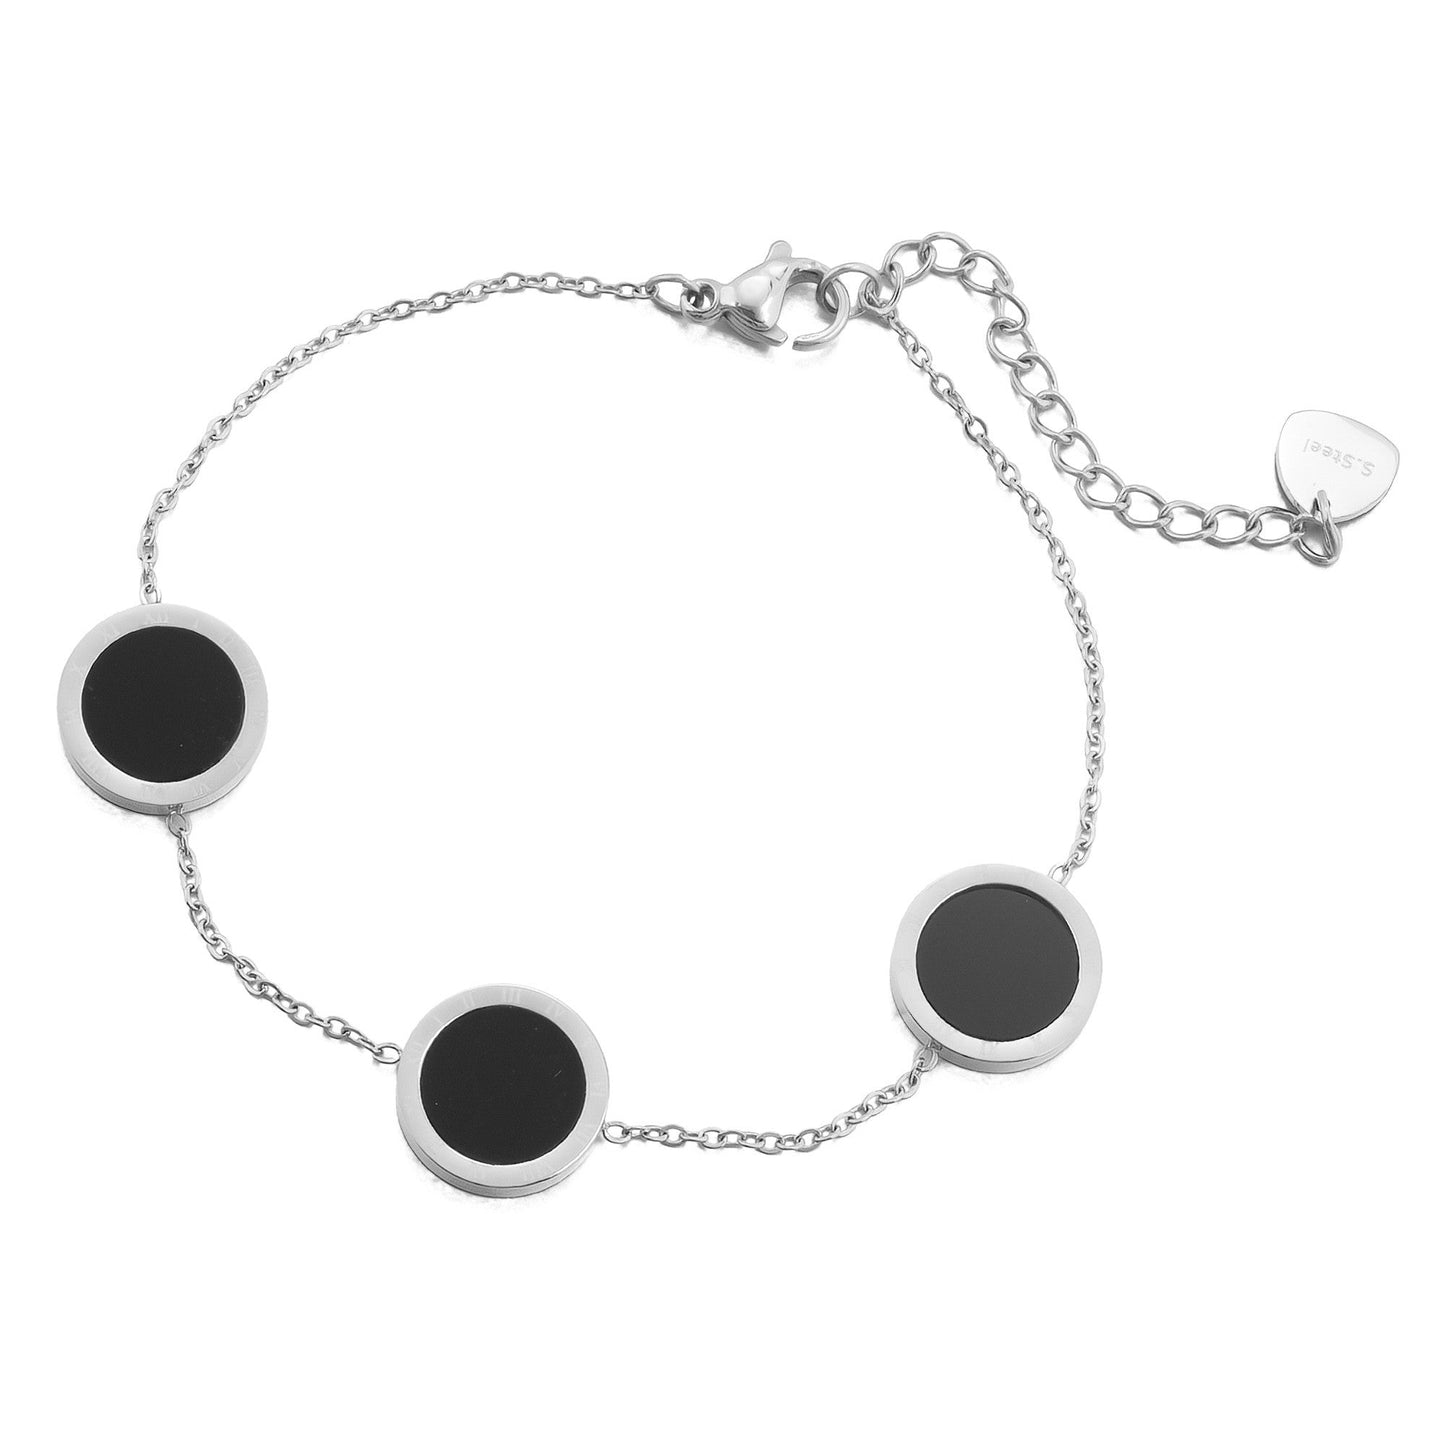 Silver Plated Bracelet with Enamel Black Circles